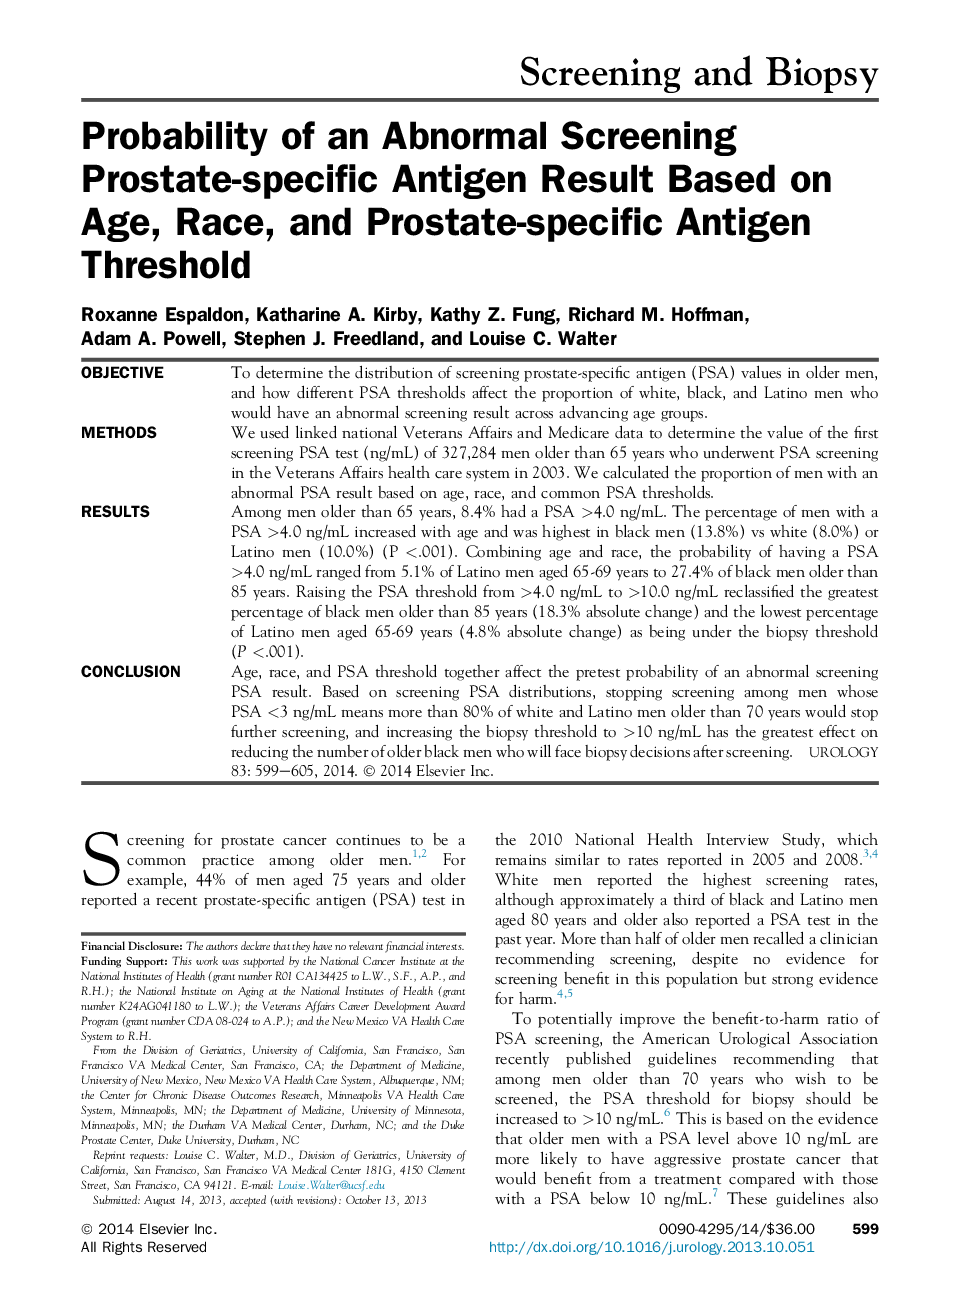 Probability of an Abnormal Screening Prostate-specific Antigen Result Based on Age, Race, and Prostate-specific Antigen Threshold 